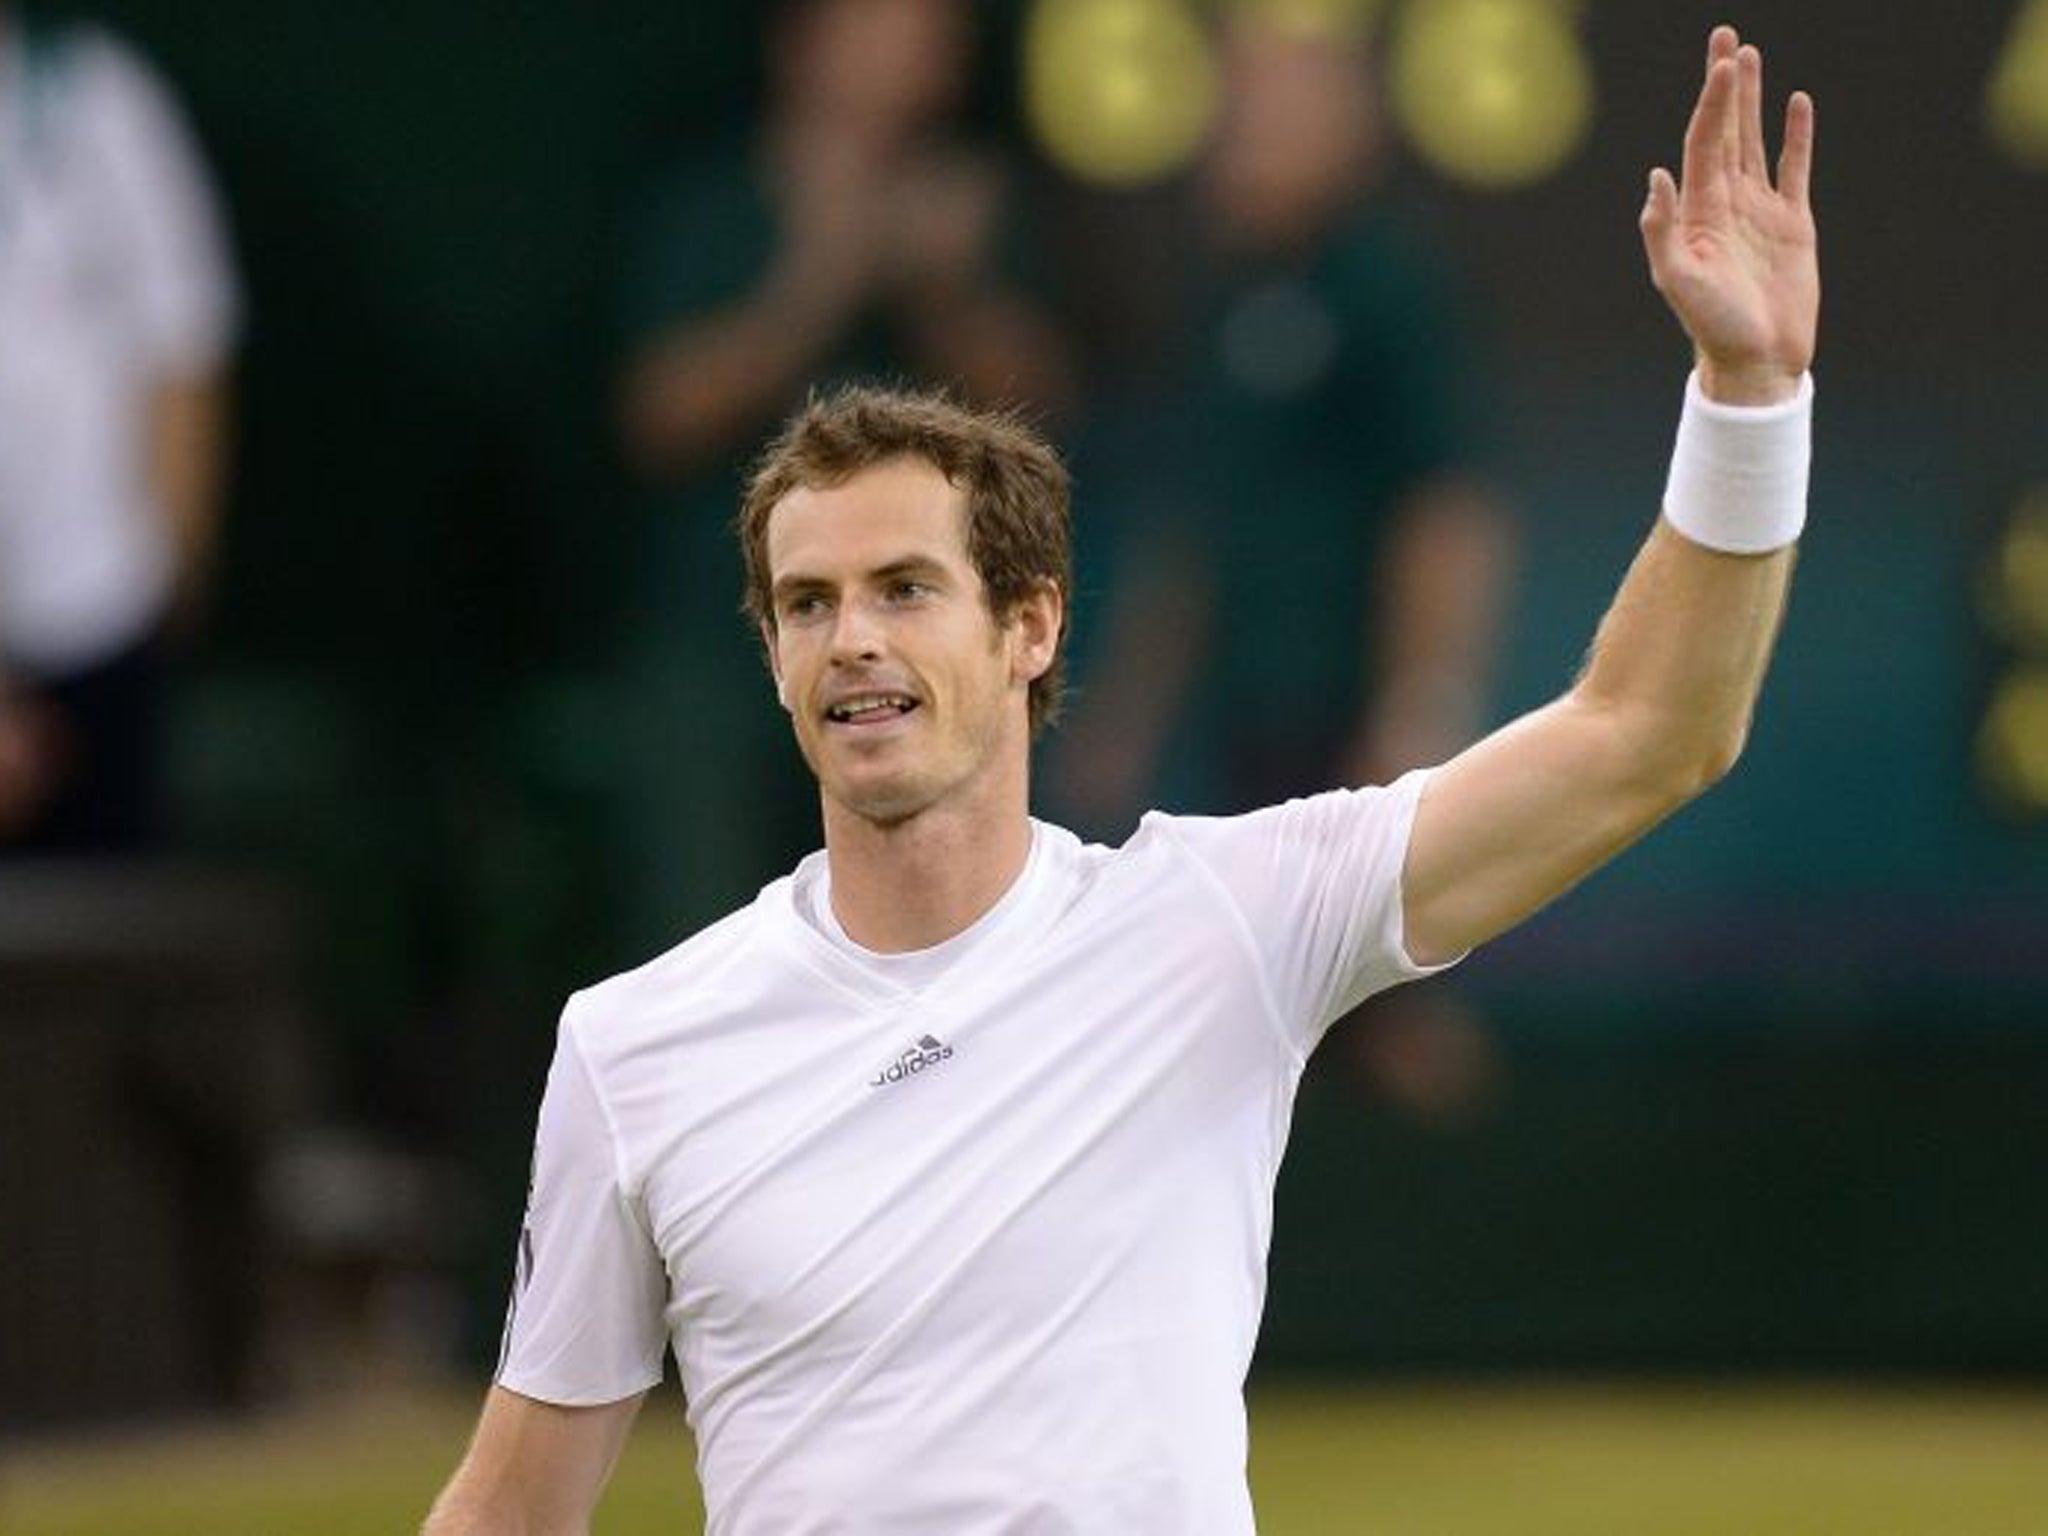 13.2 million people watched Murray beat Janowicz and book a place in final